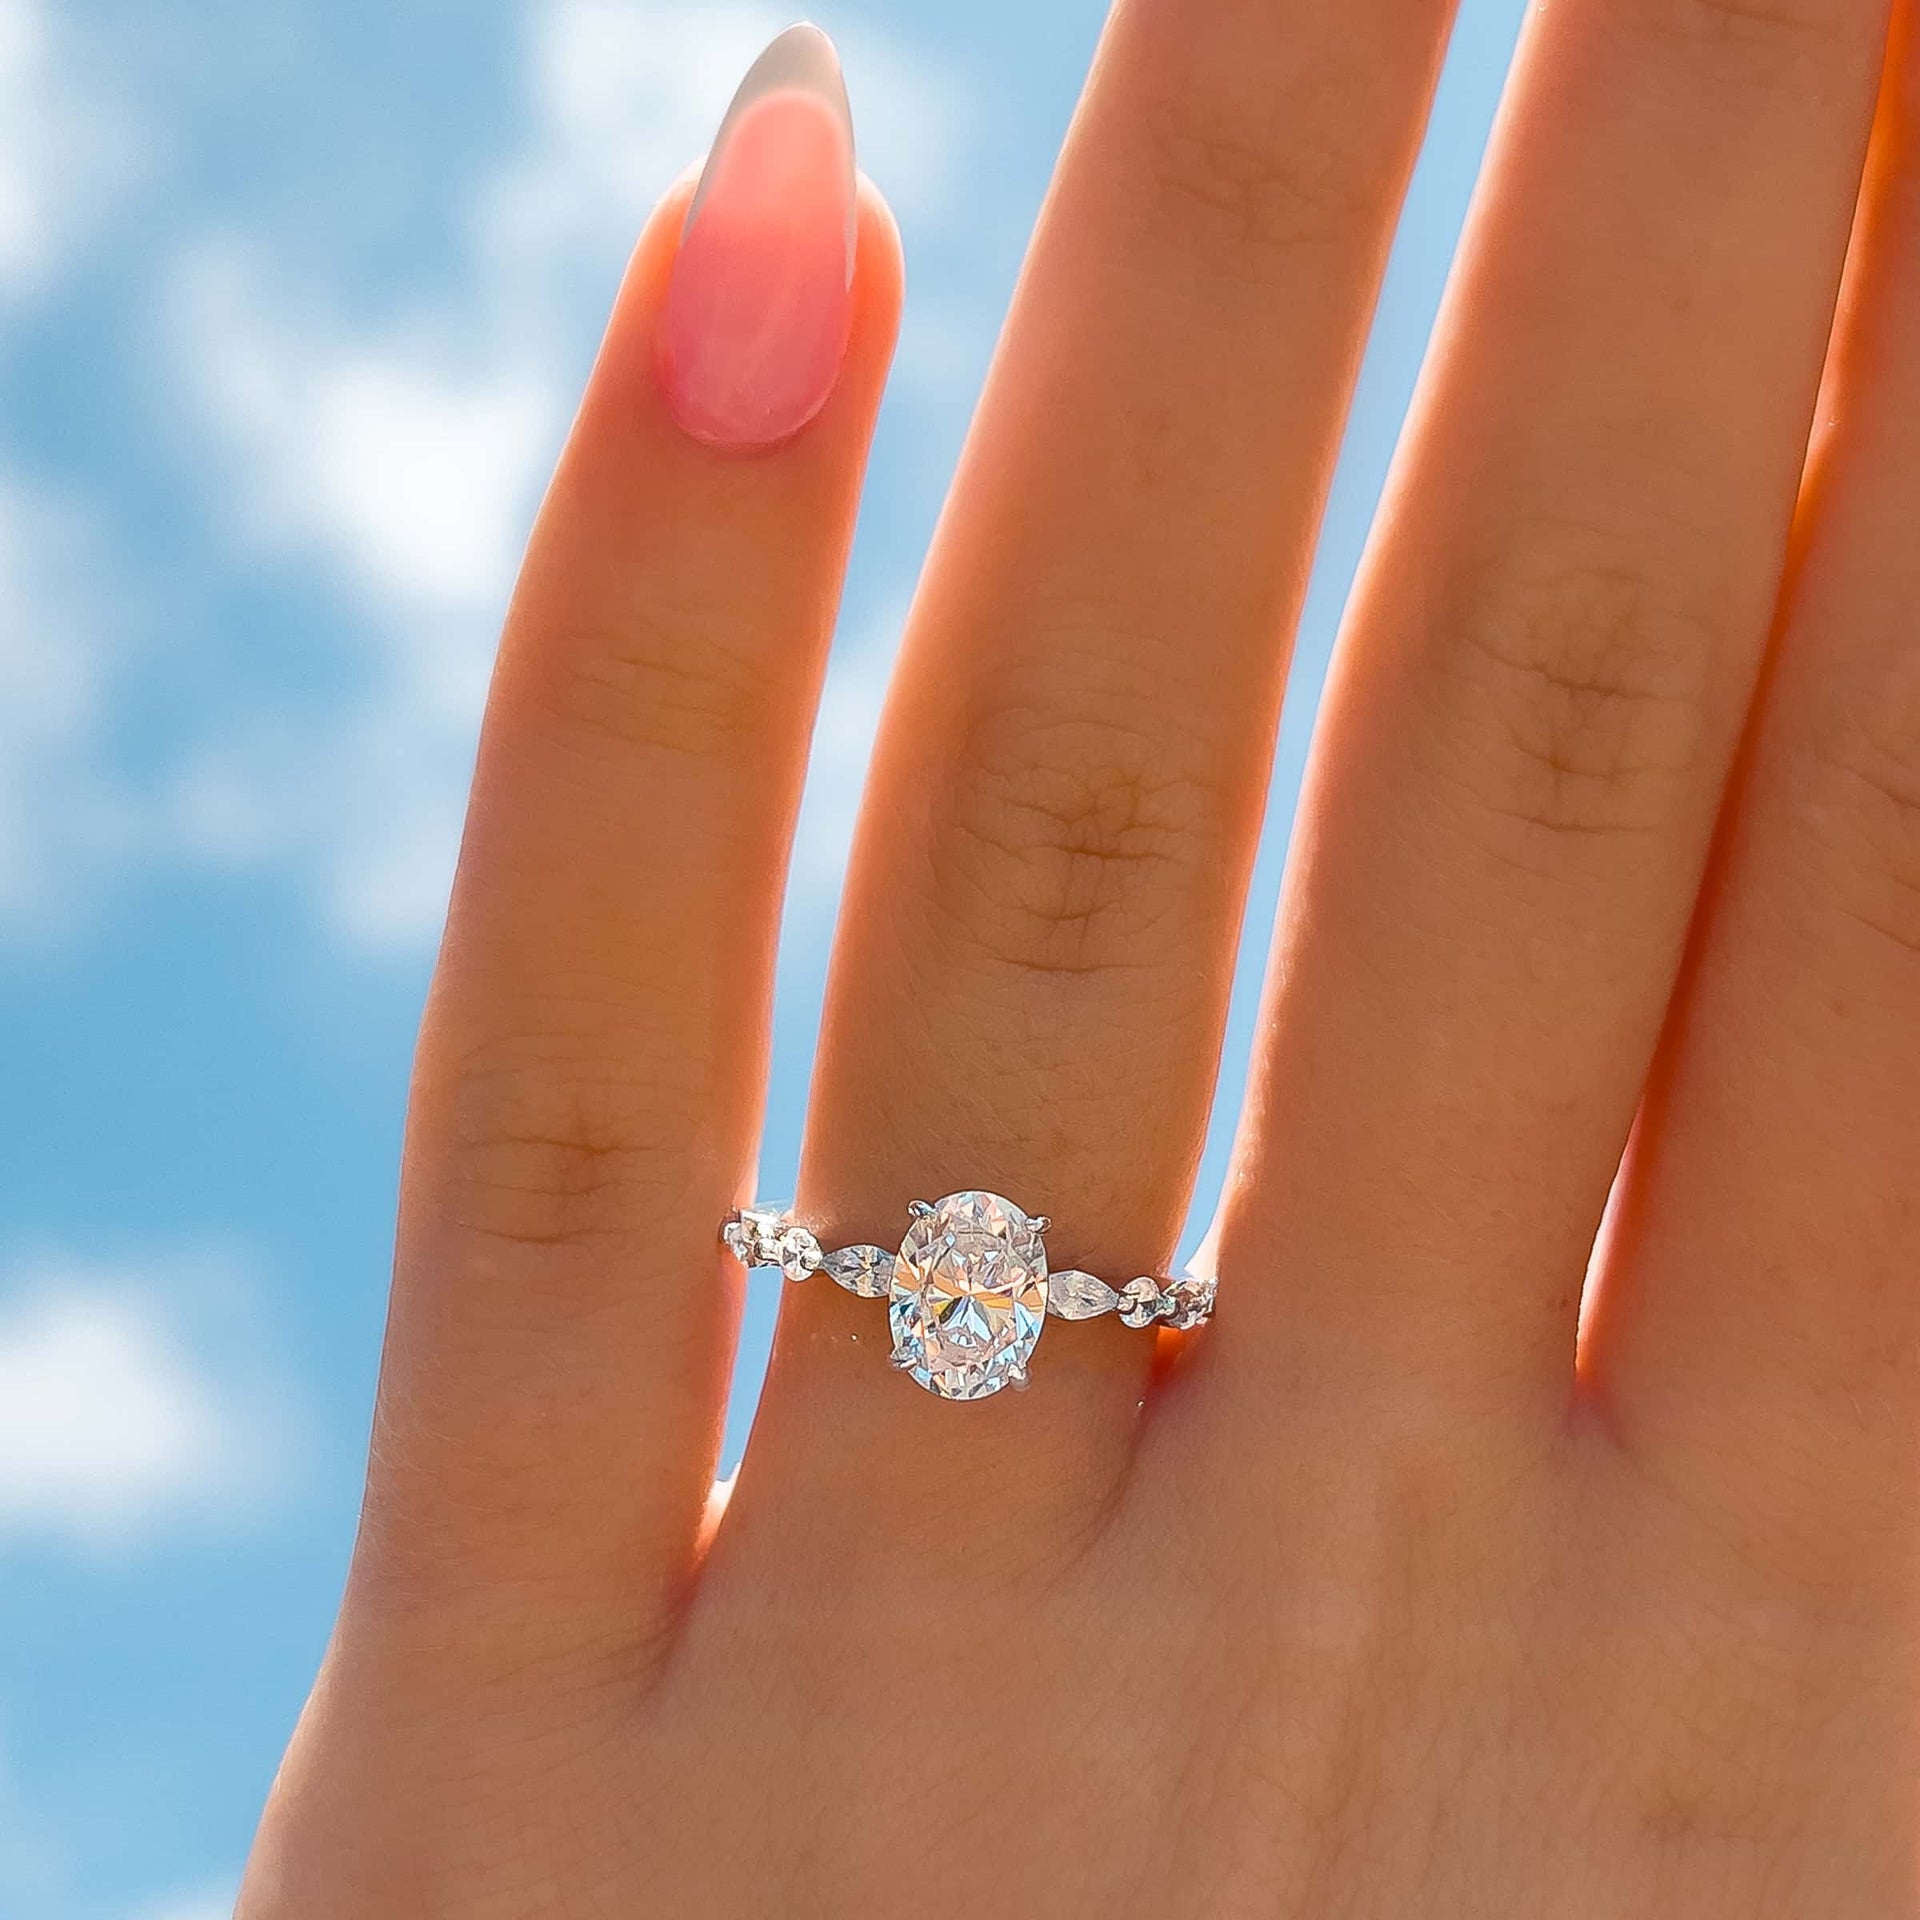 gorgeous 1.5 ct oval cut engagement ring shown in silver with blue sky in the background on female hand